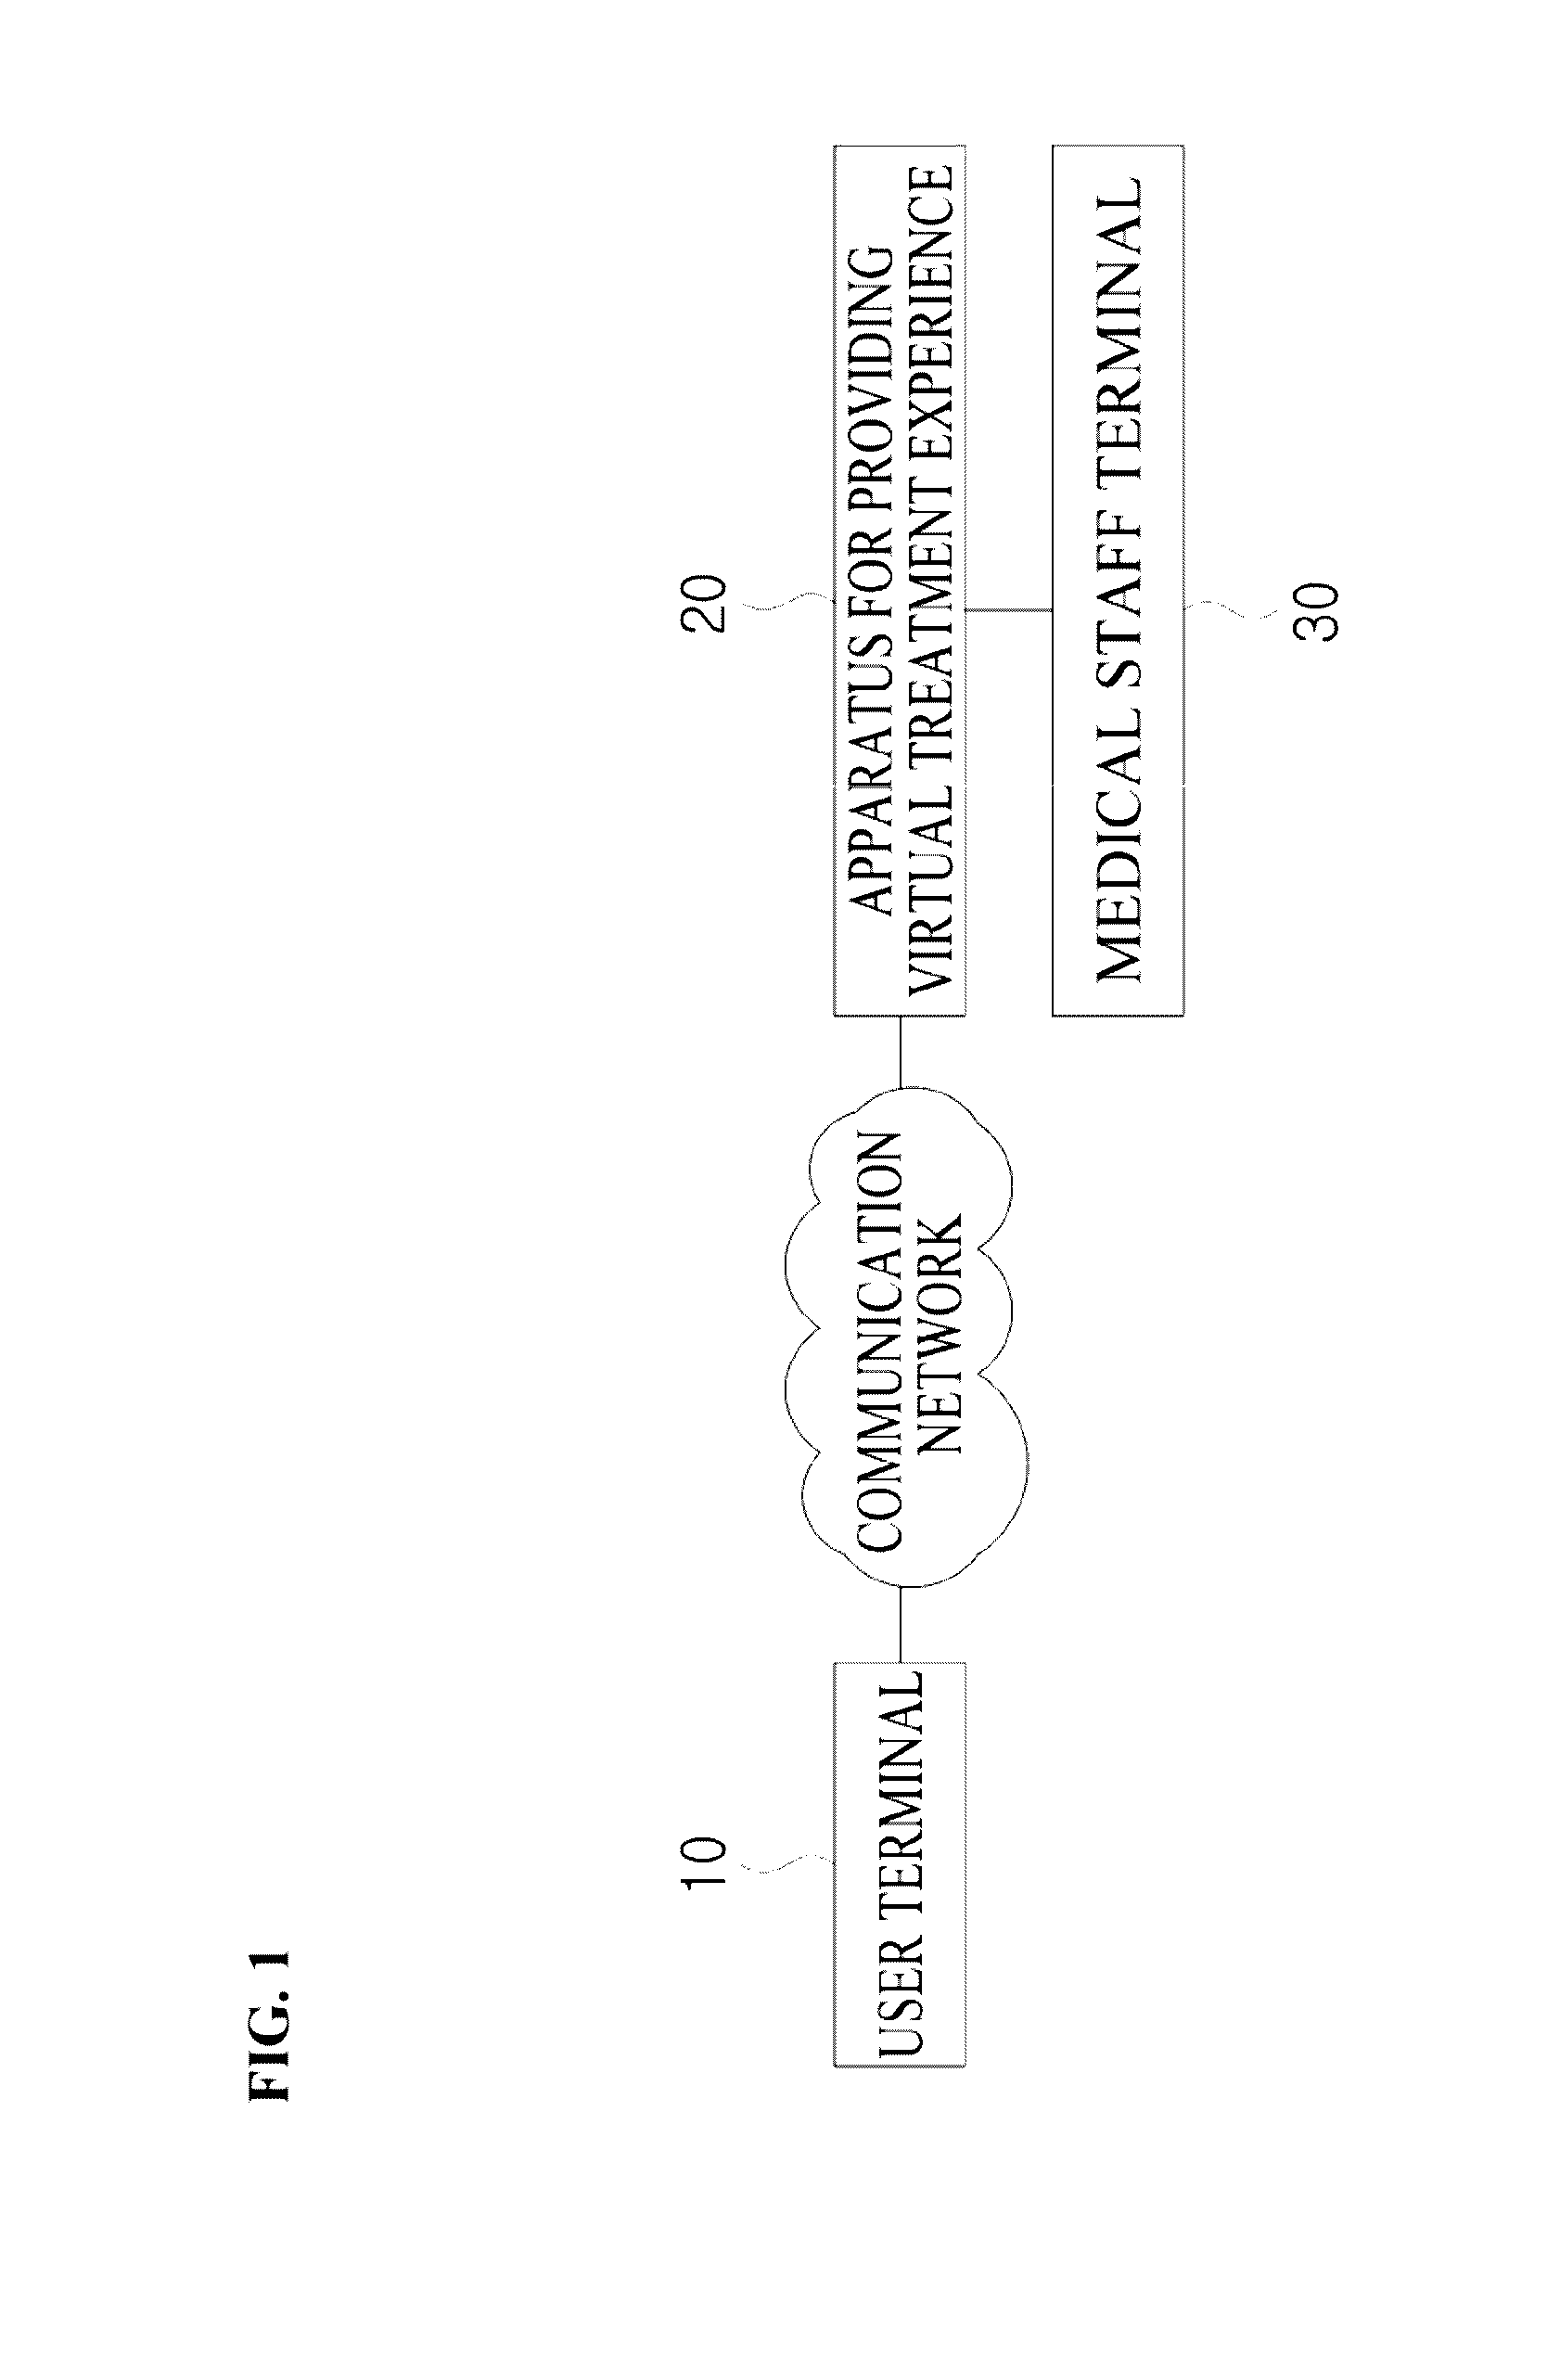 Apparatus and method for providing virtual treatment experience